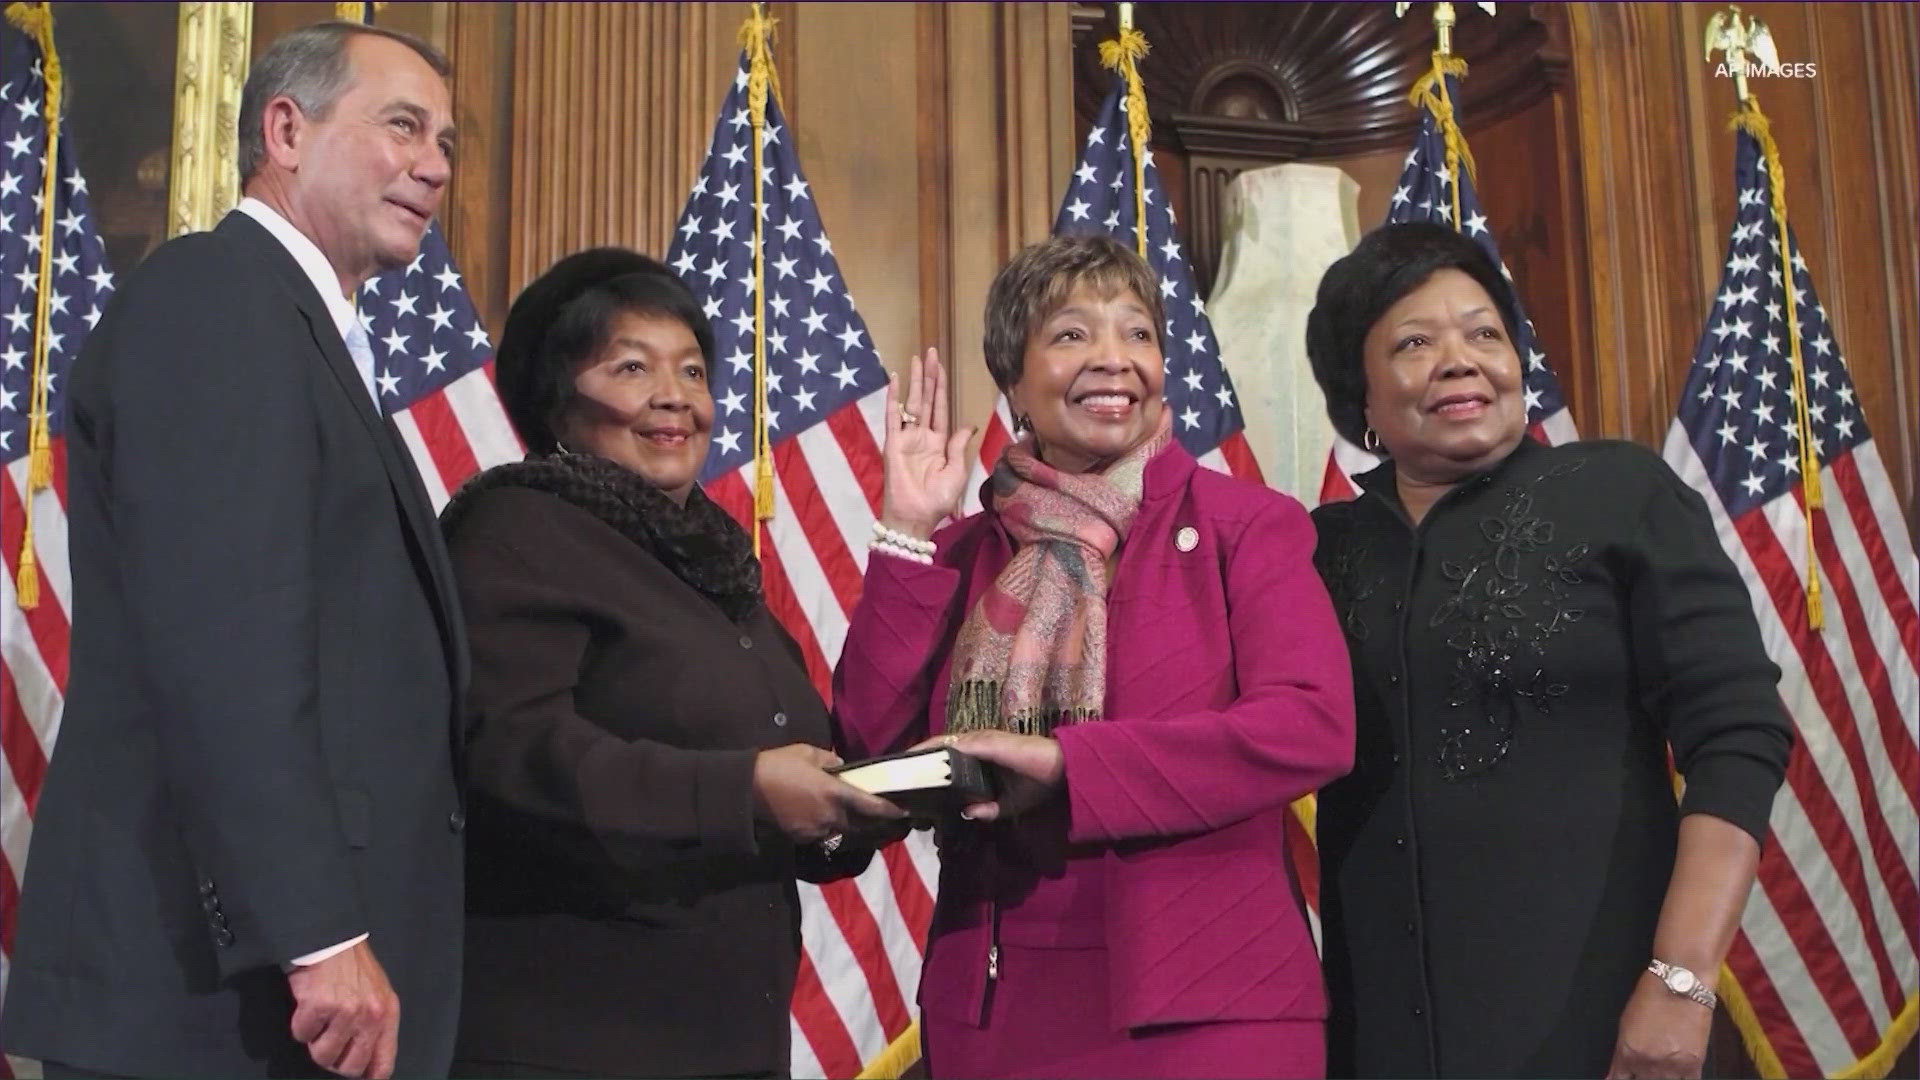 The family of the late Congresswoman Eddie Bernice Johnson has reached a resolution in their allegations against Baylor Scott & White over Johnson's medical care.